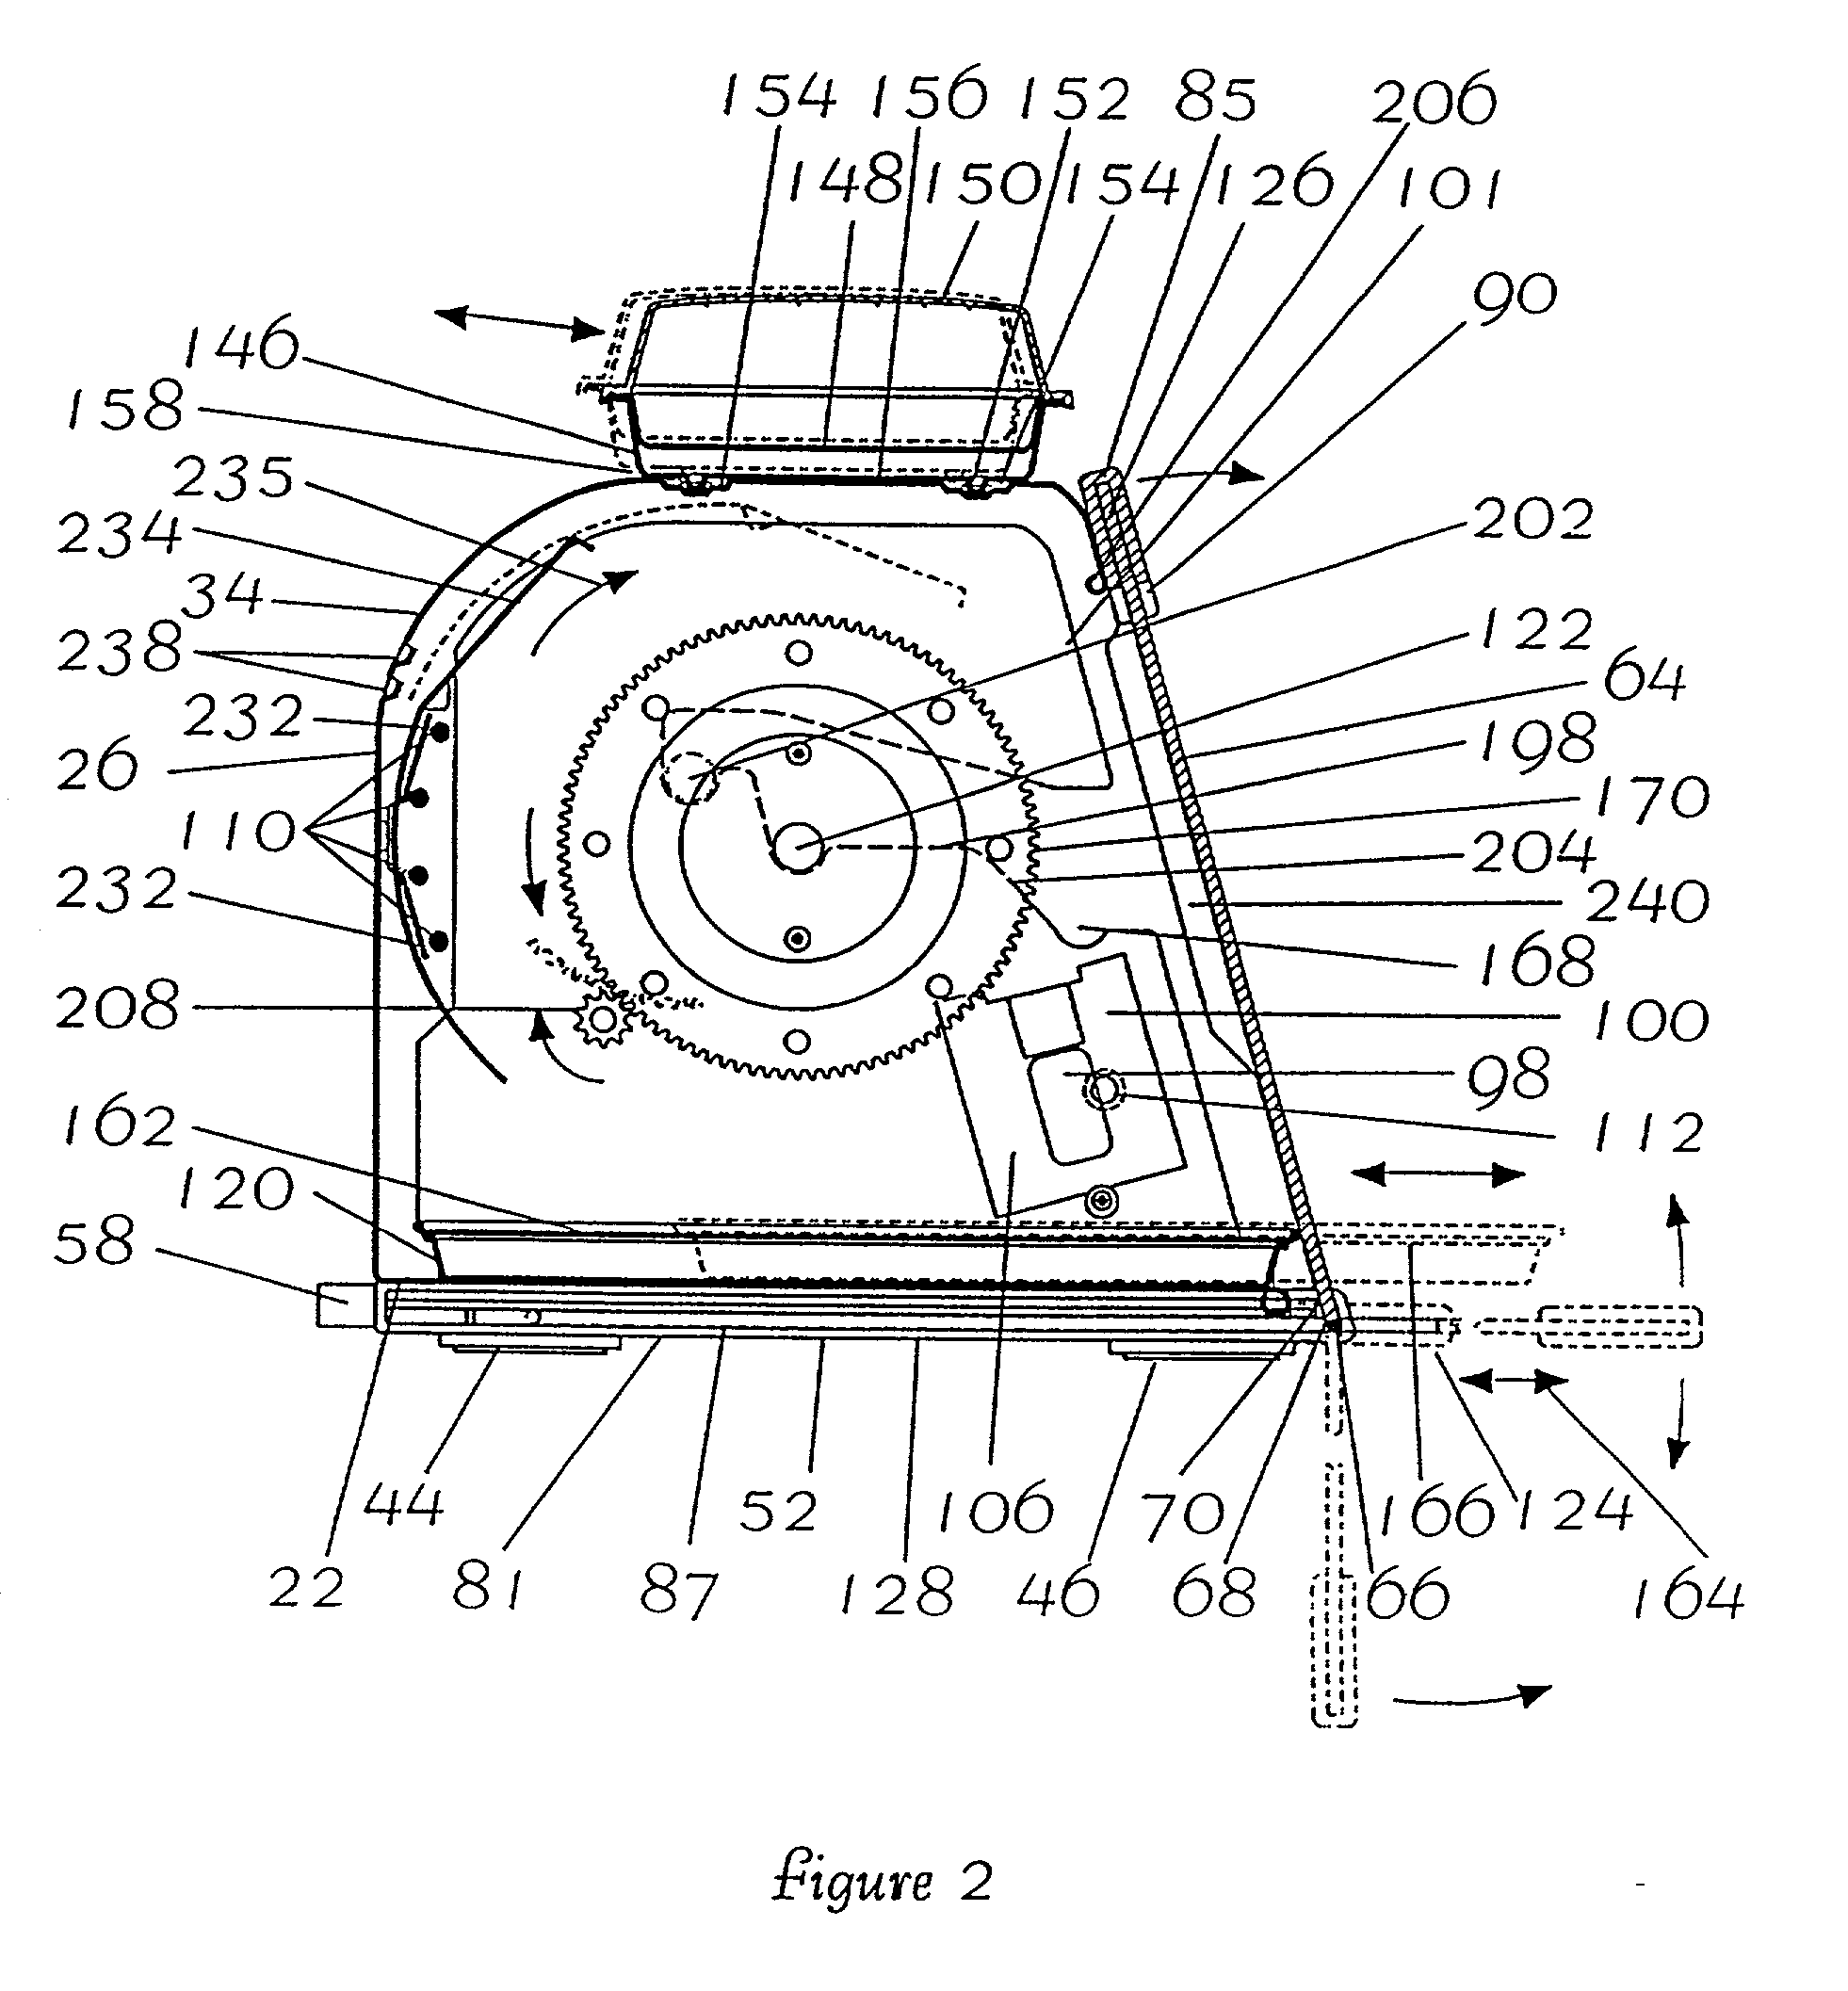 Horizontal spit rotisserie cooking device